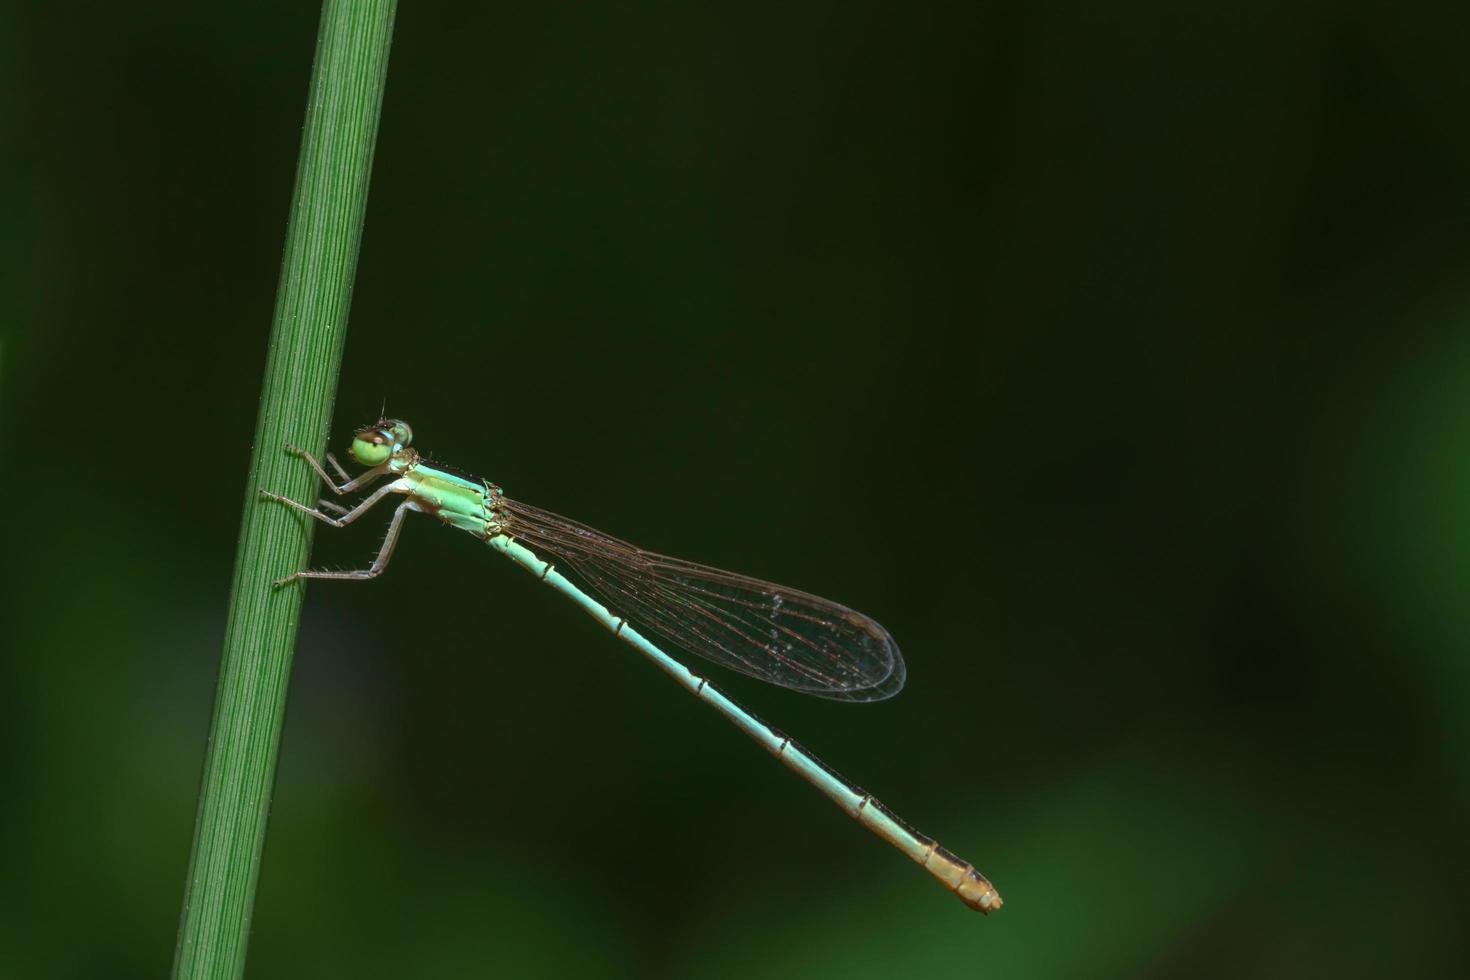 Insect close-up of Damselfly photo